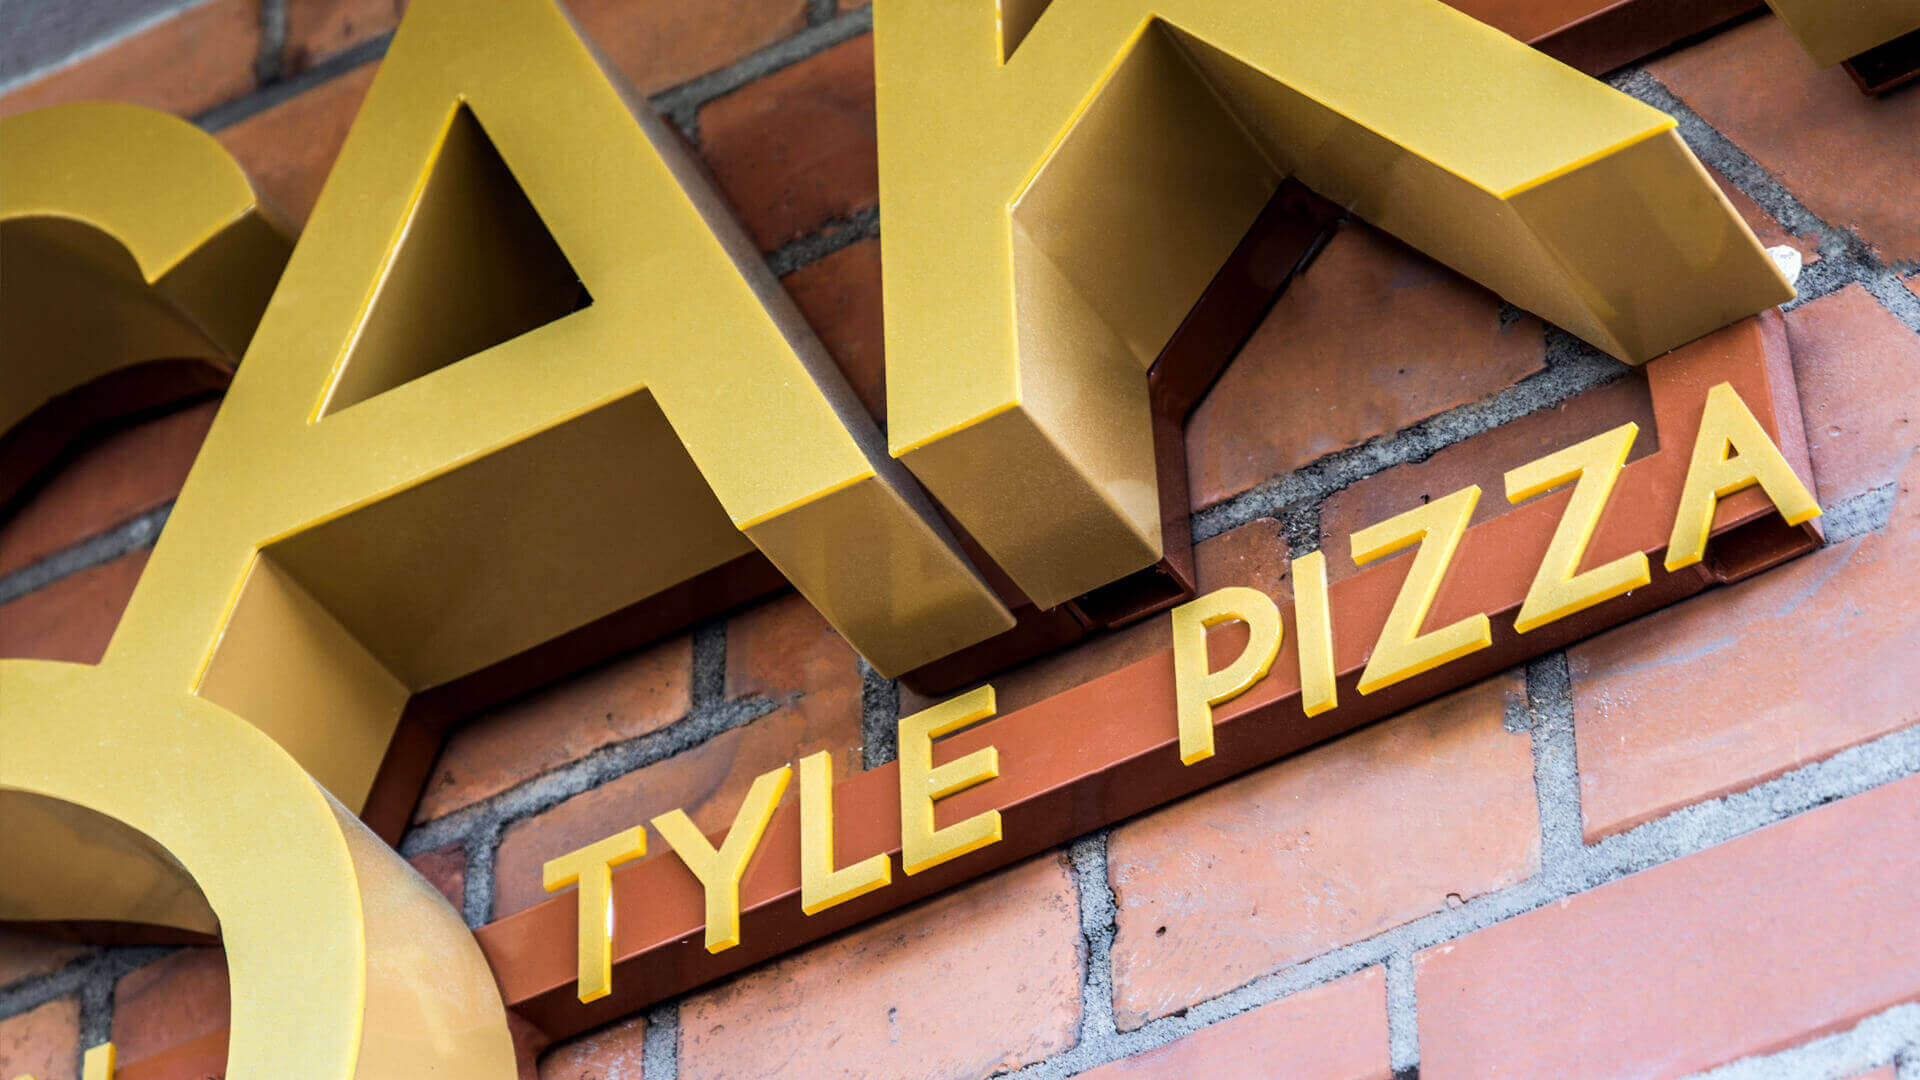 husak pizzeria - hussak-pizzeria-zlote-literature-spatial-sub-lit-type letters-on-the-wall-with-a-brick-over-the-entry-over-the-surface-mounted-over-the-wall-grunwaldzka-gdansk (14)